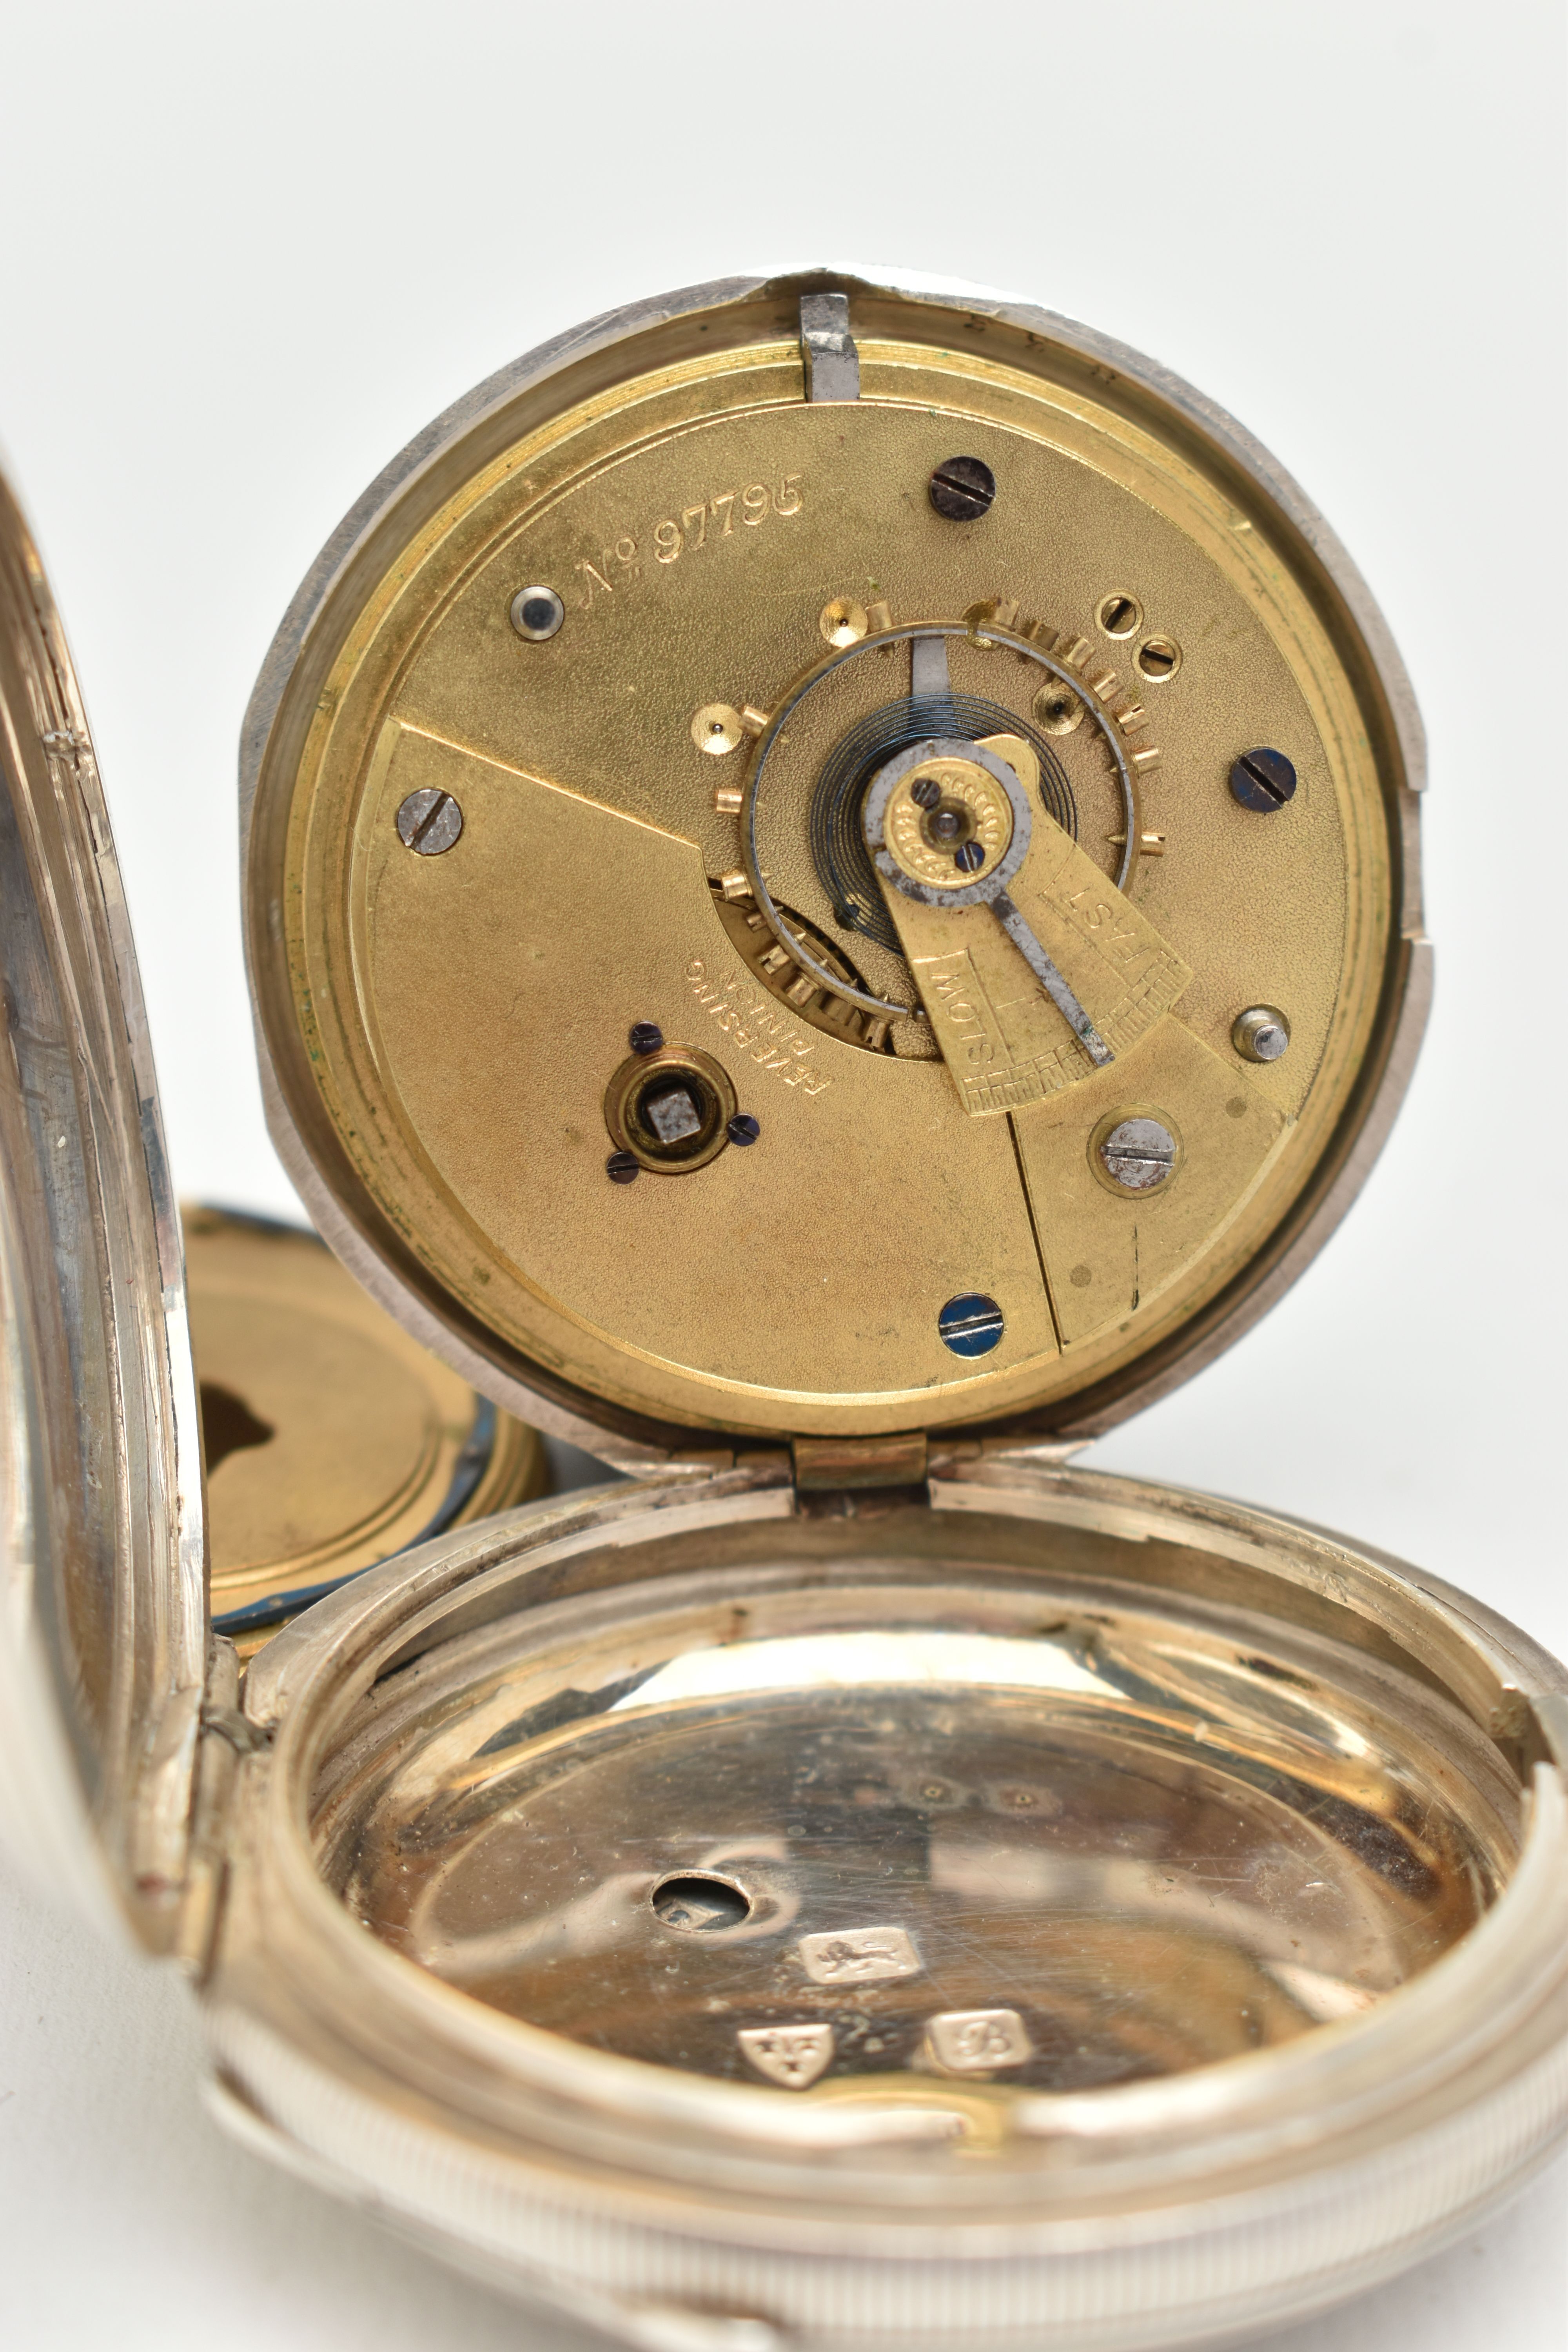 AN EDWARDIAN SILVER FULL HUNTER POCKET WATCH, key wound movement, Roman numerals, second - Image 6 of 6